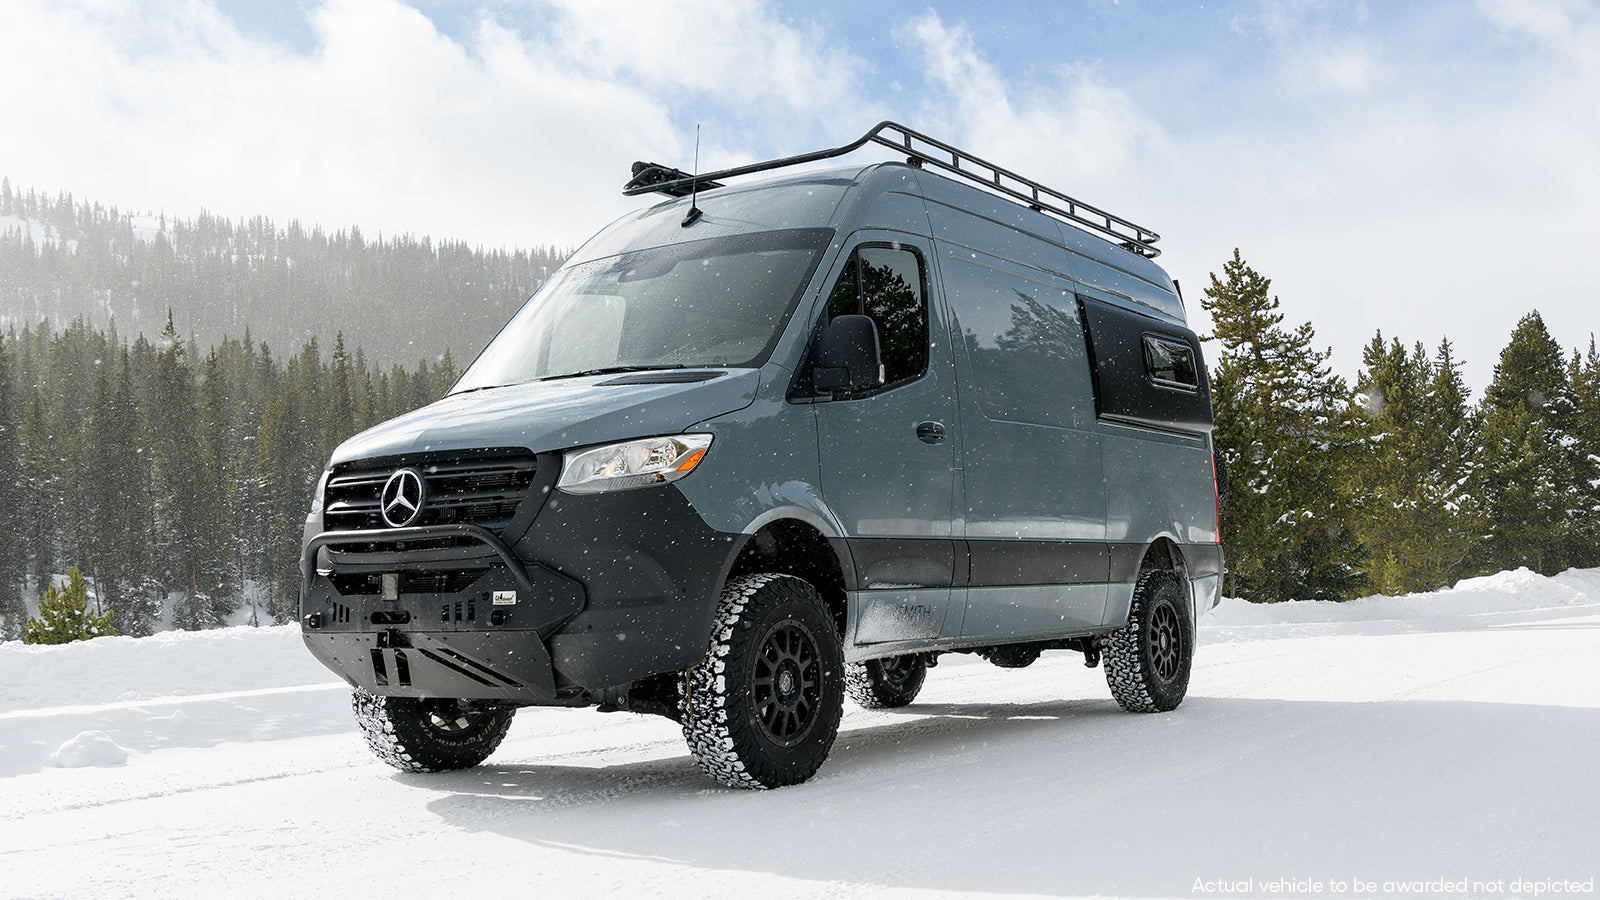 This Sprinter Expedition Camper Van Is Hulked Out For OffRoading